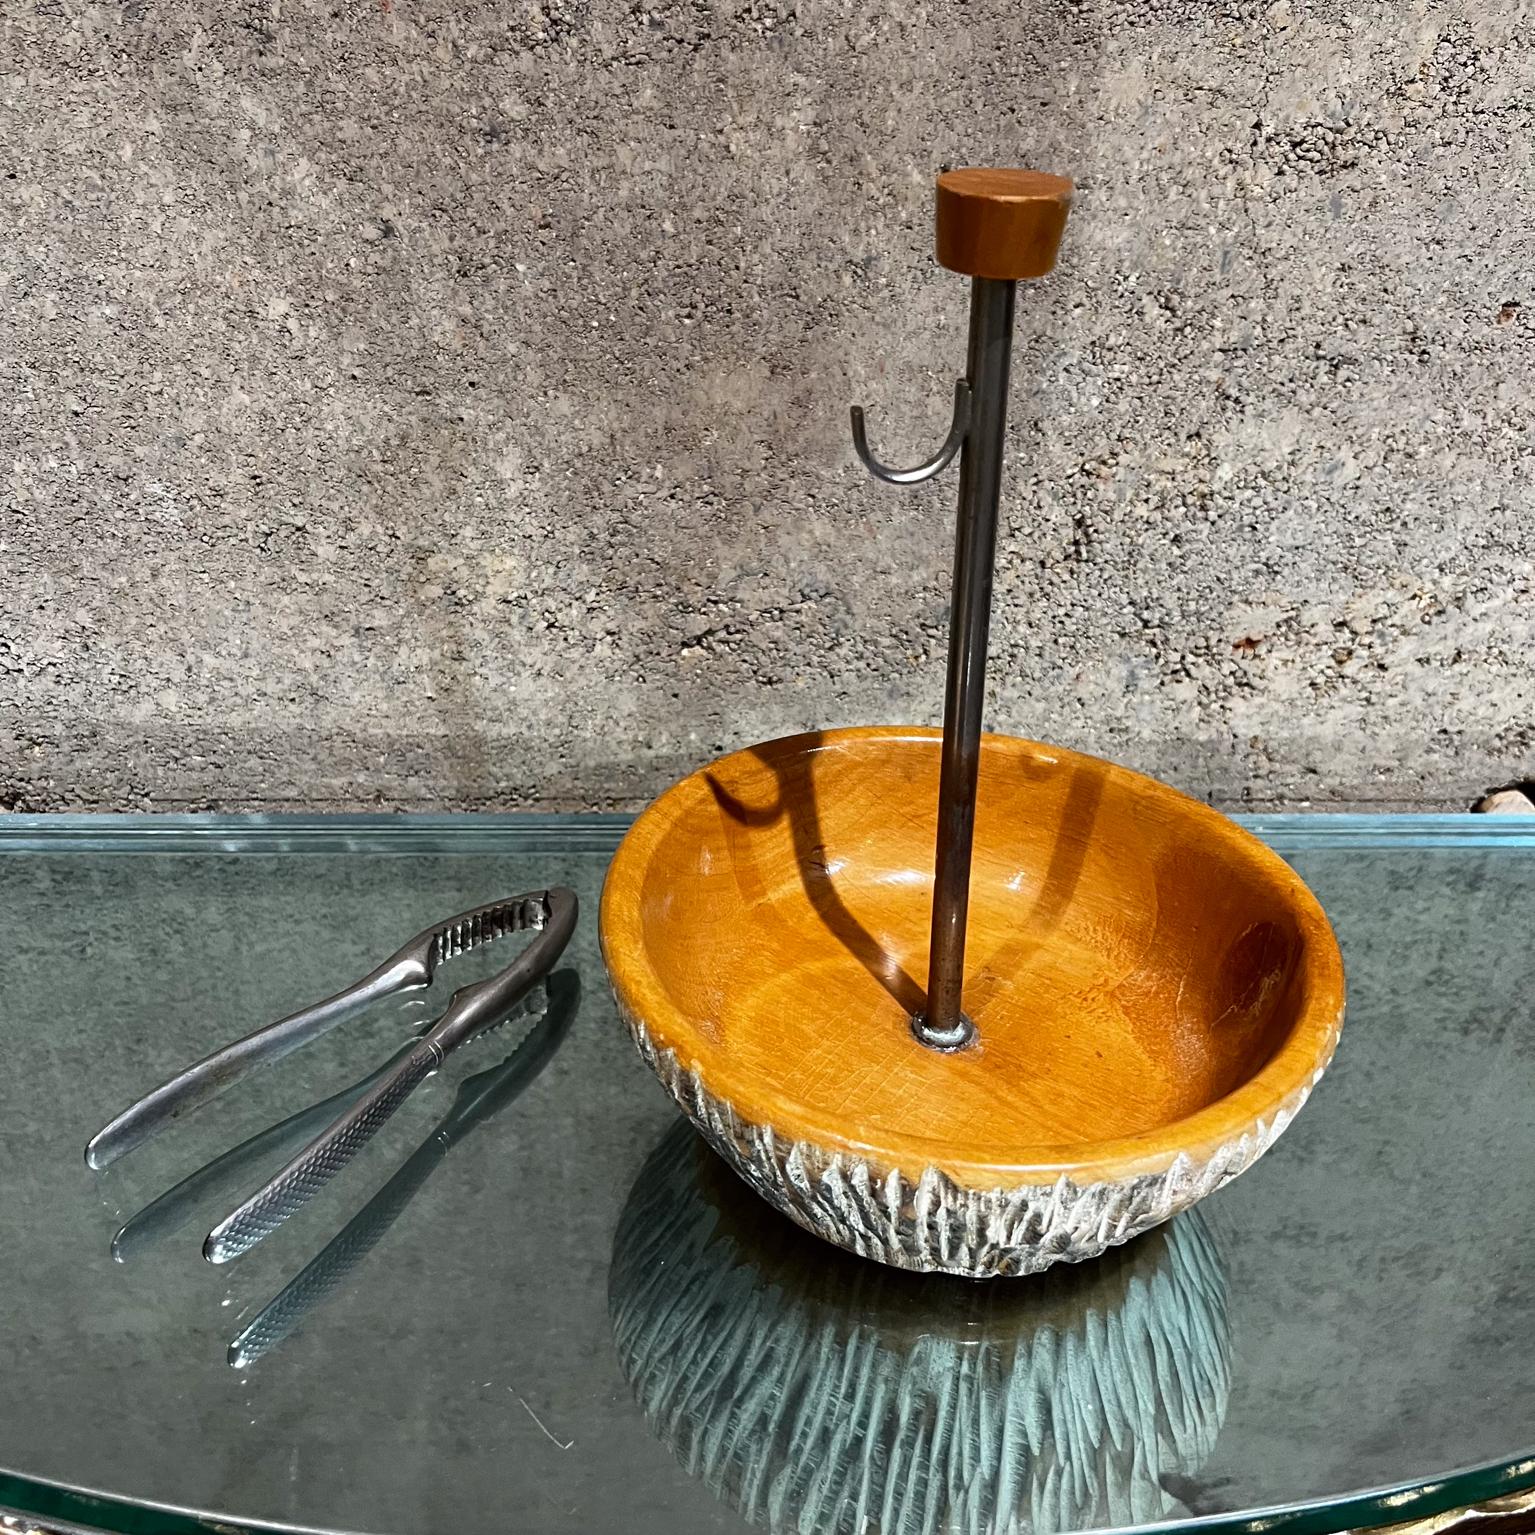 1960s Aldo Tura Sculptural Wood Bowl with Stainless Steel Nutcracker Macabo ITALY 
Bowl has a center stem with hook to place nutcracker.
8.5H x 6.63 in diameter
Maker Stamped Macabo designed by Aldo Tura
Original Unrestored Preowned Good Vintage